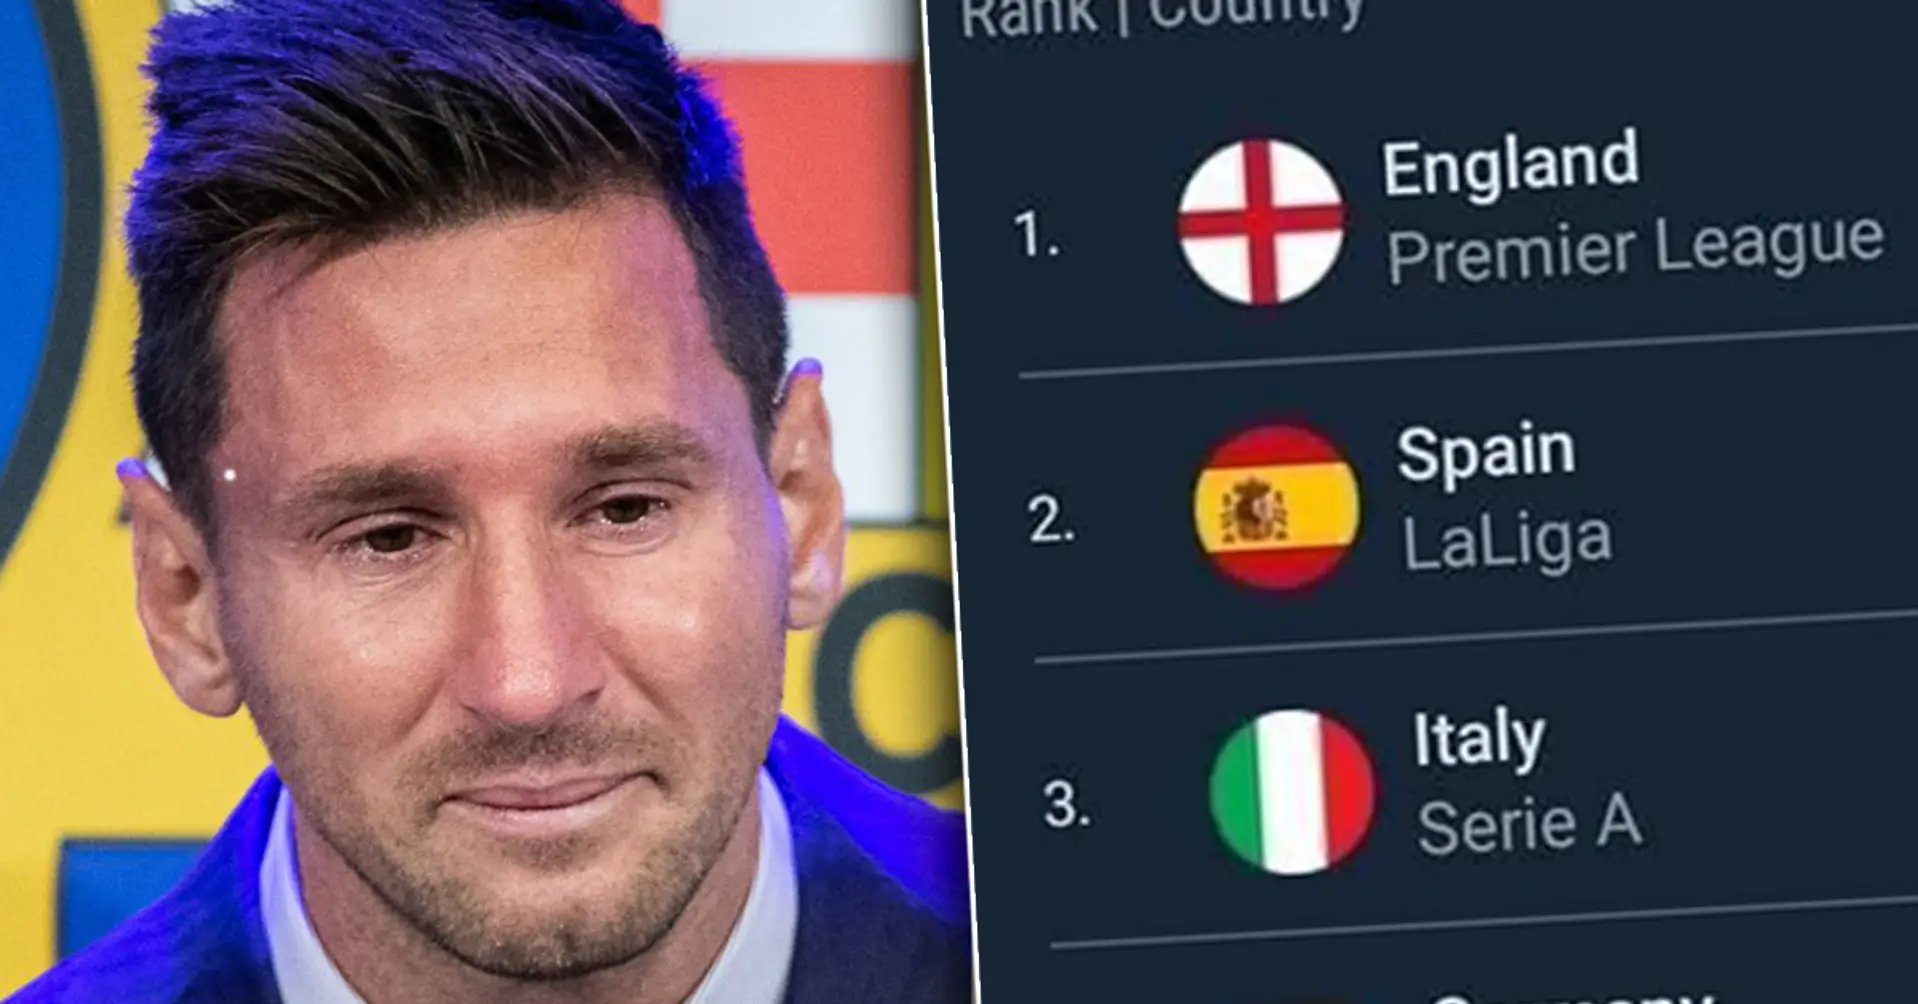 Bad news for Leo Messi: New UEFA league rankings have been published